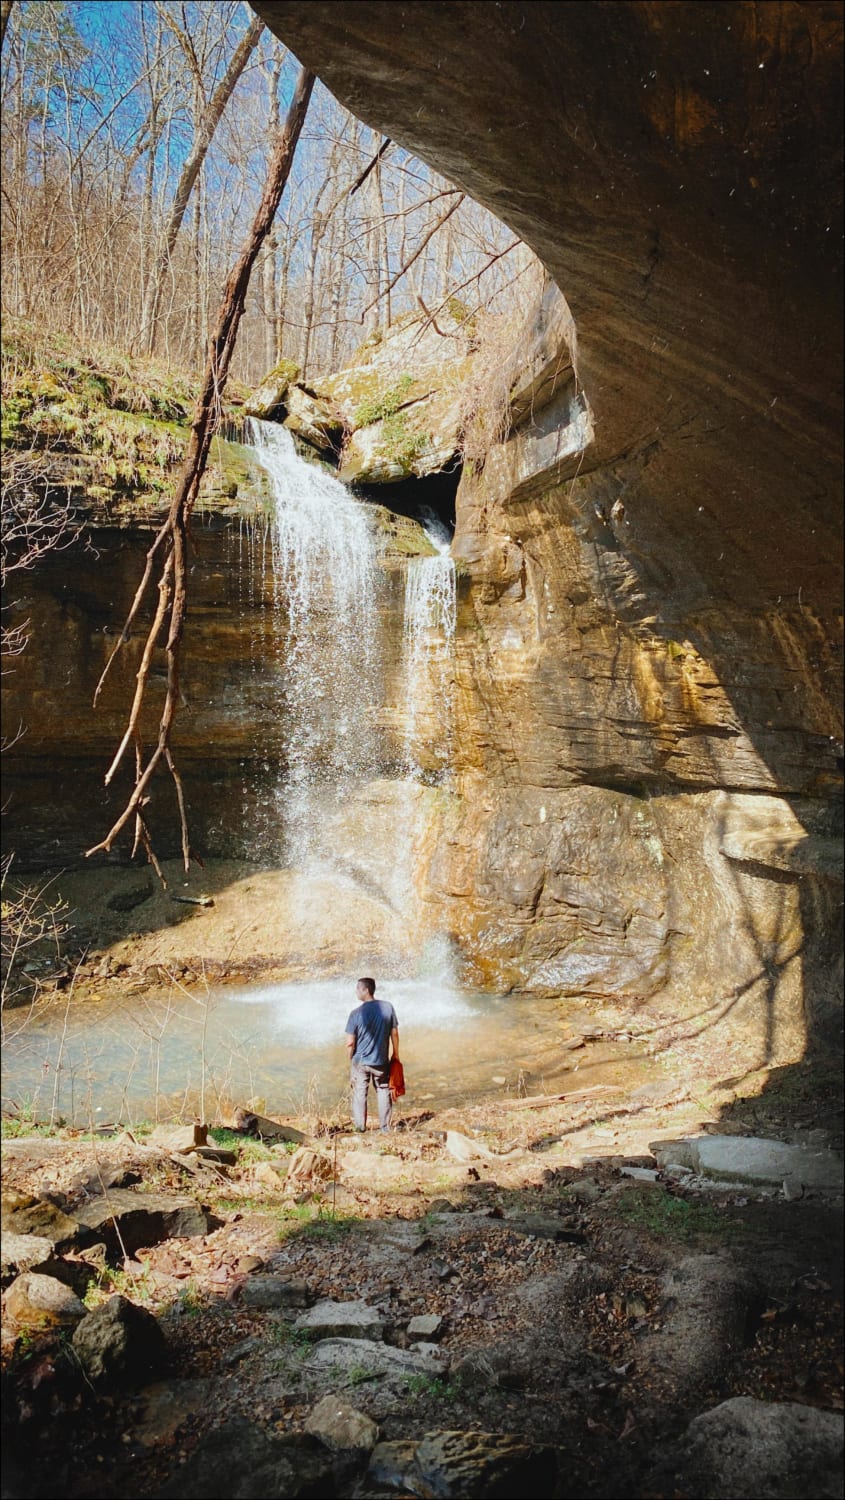 Found this waterfall over the weekend! King's River overlook trail. Huntsville, Arkansas